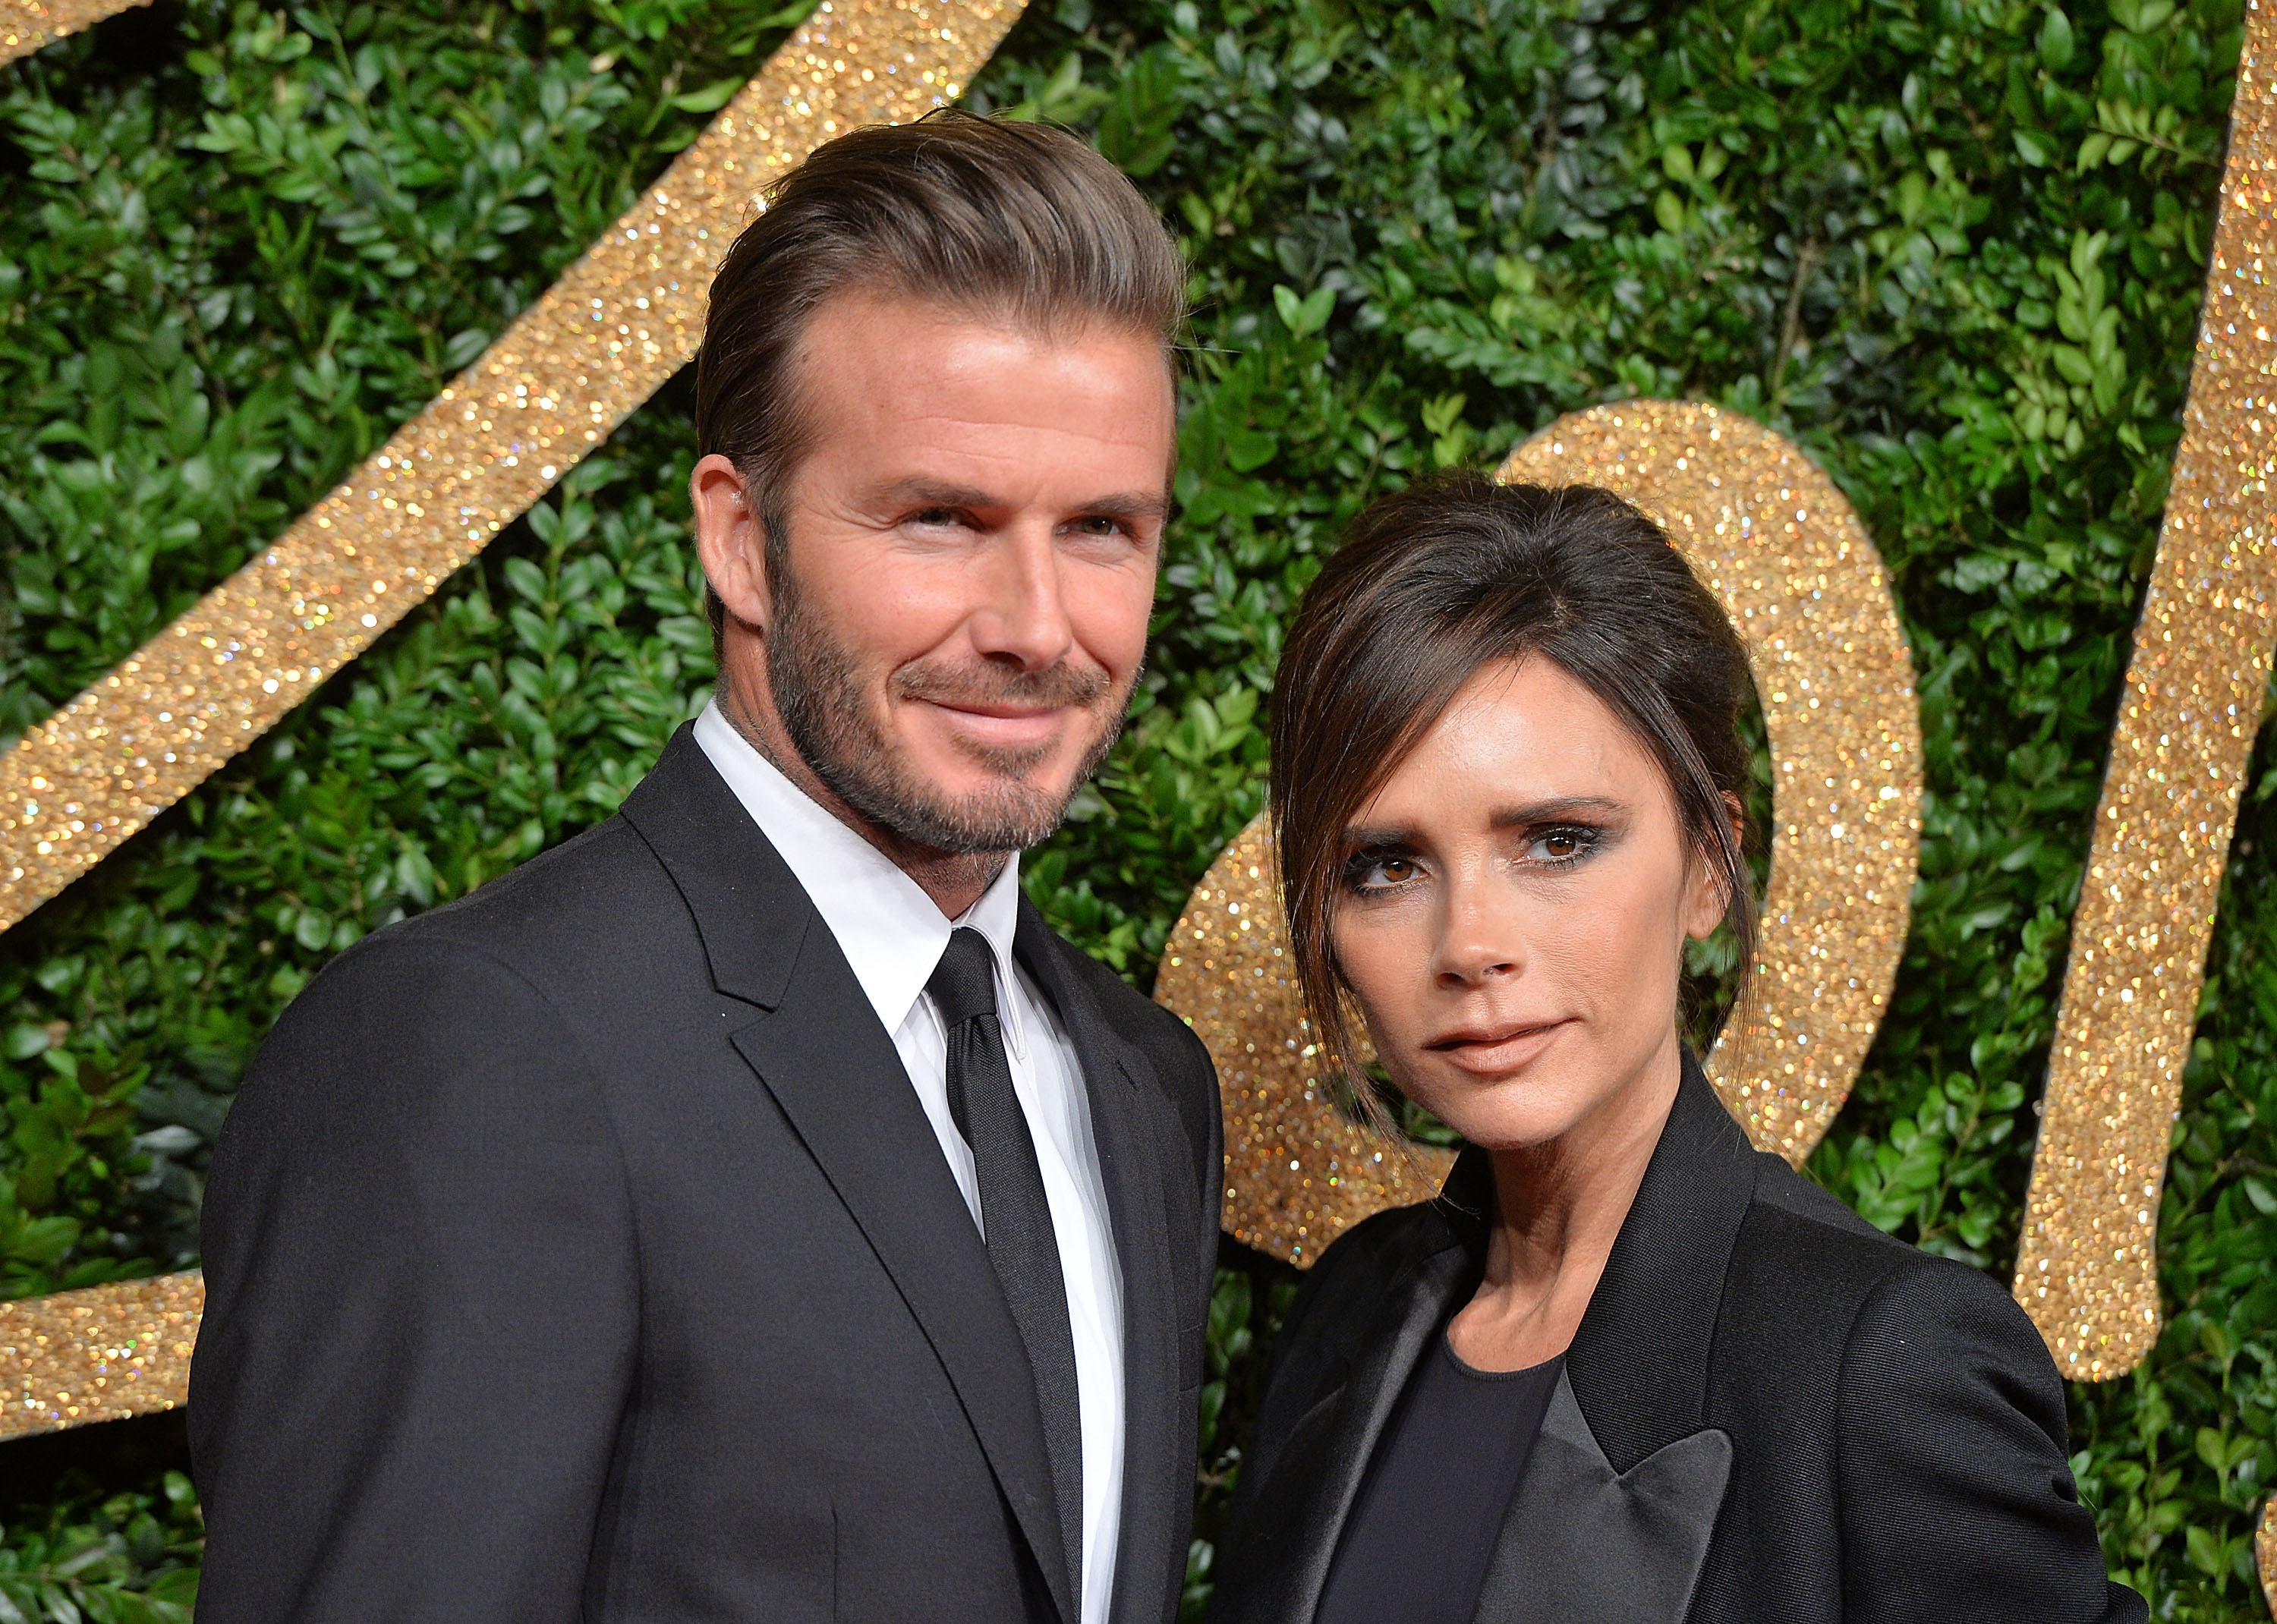 Victoria And David Beckham Nail His-And-Hers Suits